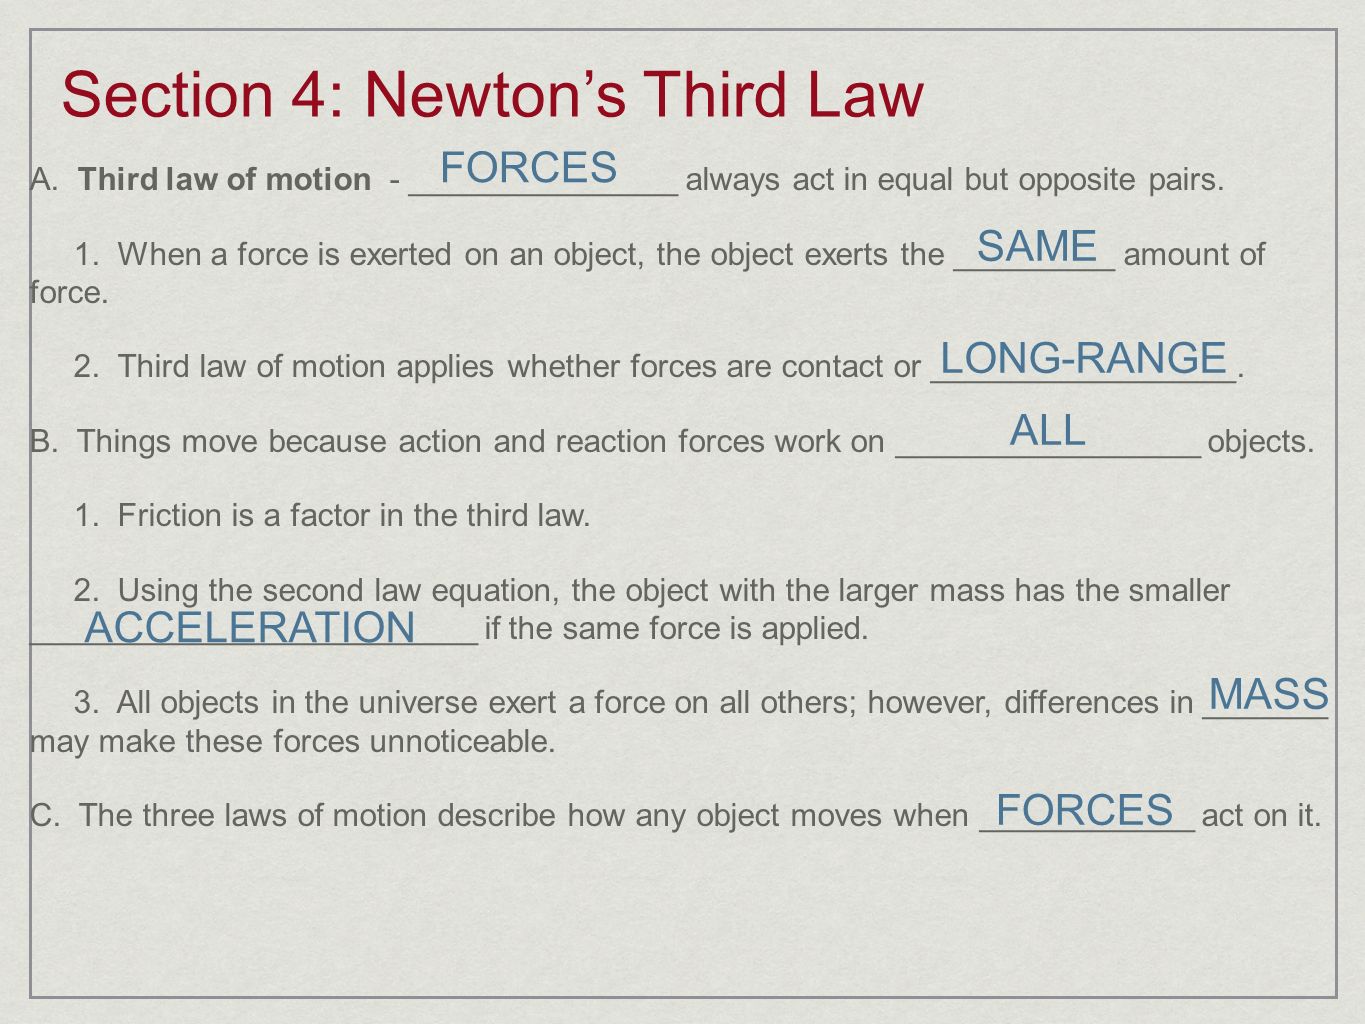 Section 4: Newton’s Third Law